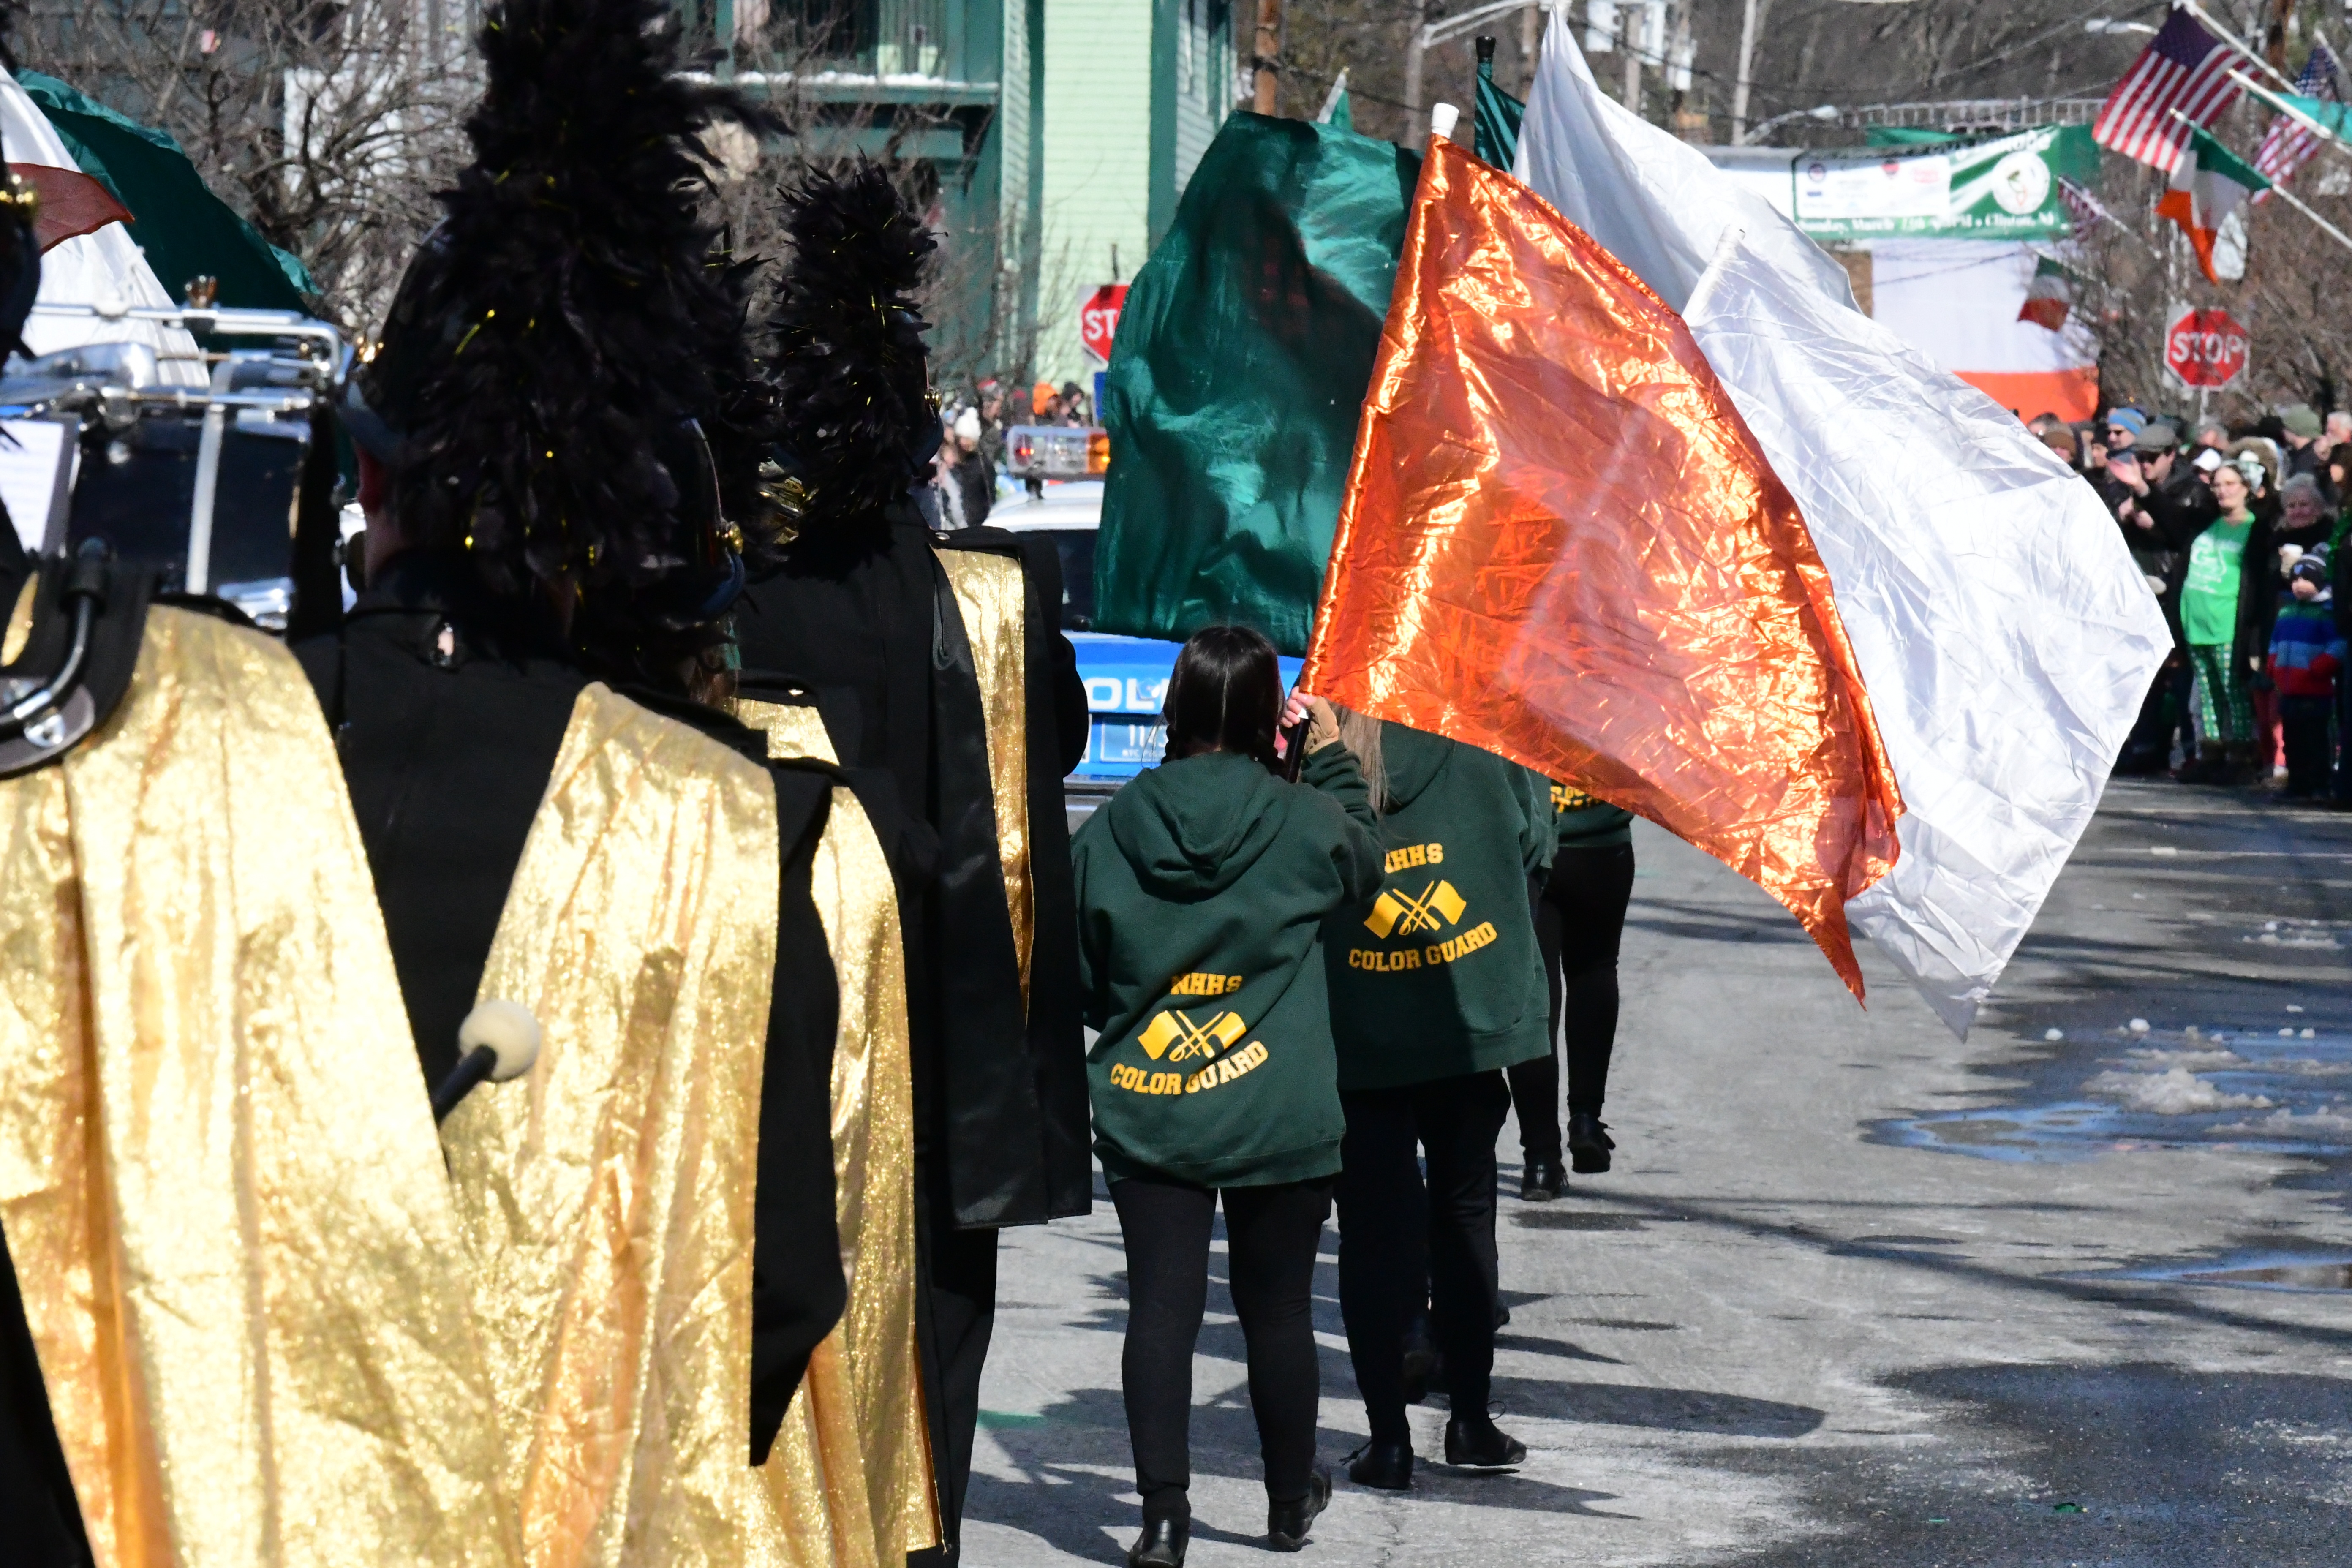 The 2022 St Patrick's Day Parade hosted by the Friendly Sons of St Patrick Hunterdon County took place in Clinton on March 13.



